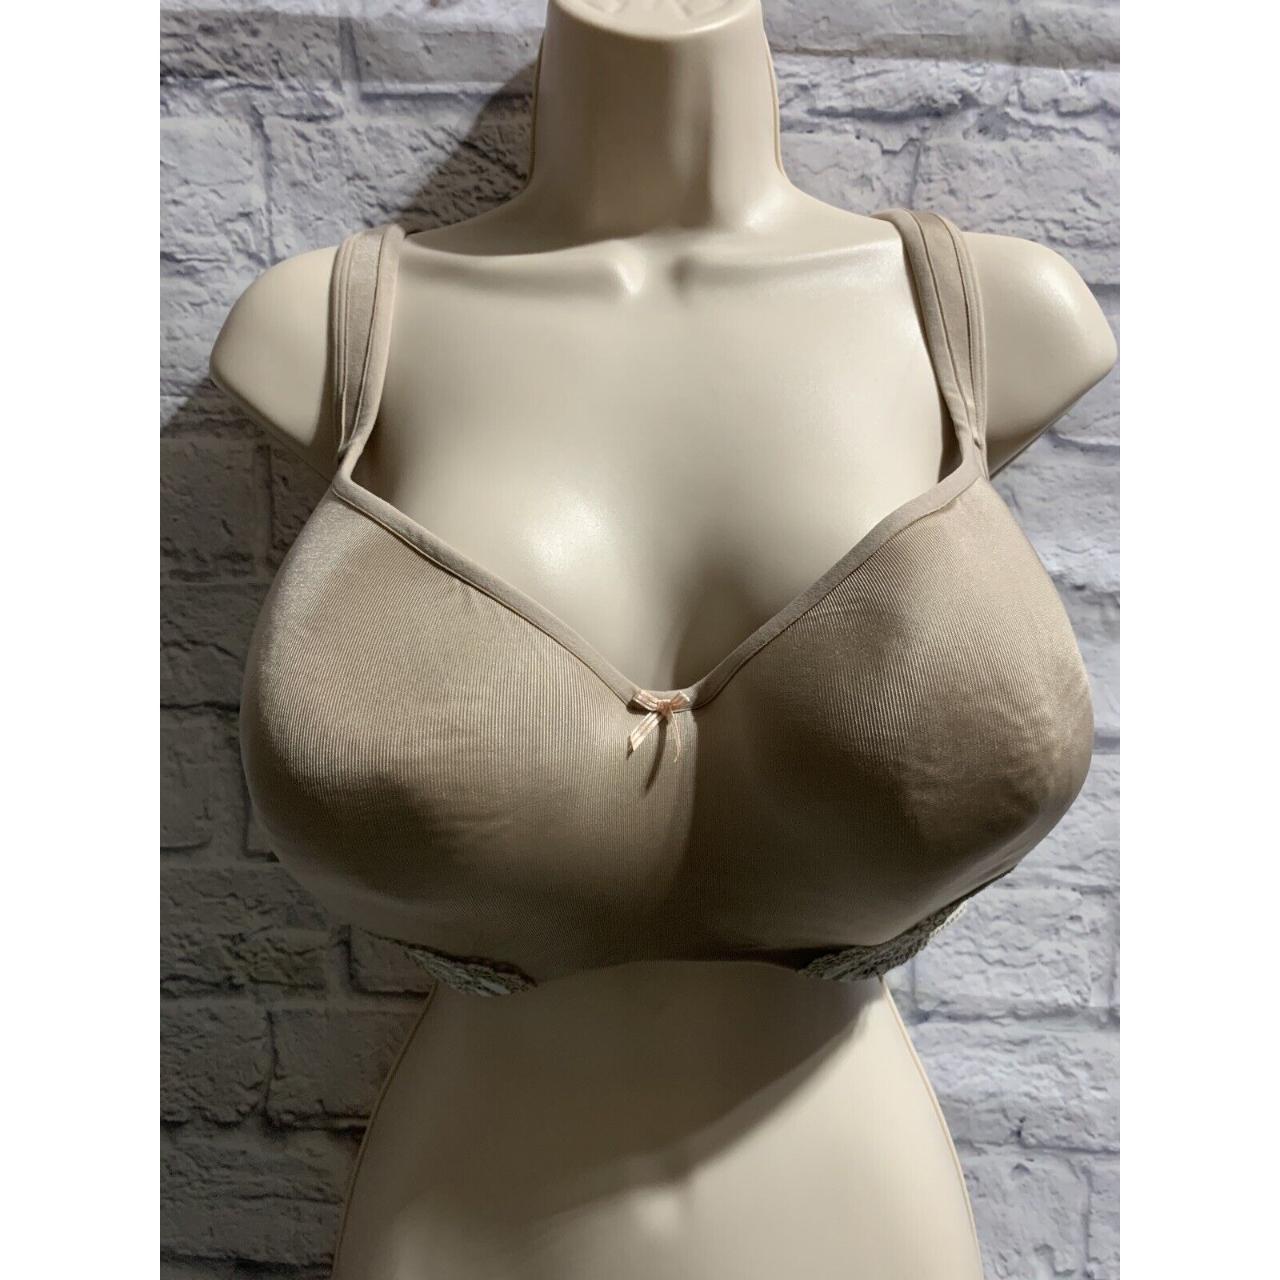 Cacique Bra Full Coverage Beige Lace Underwire Lane Bryant Lightly Lined  42DDD